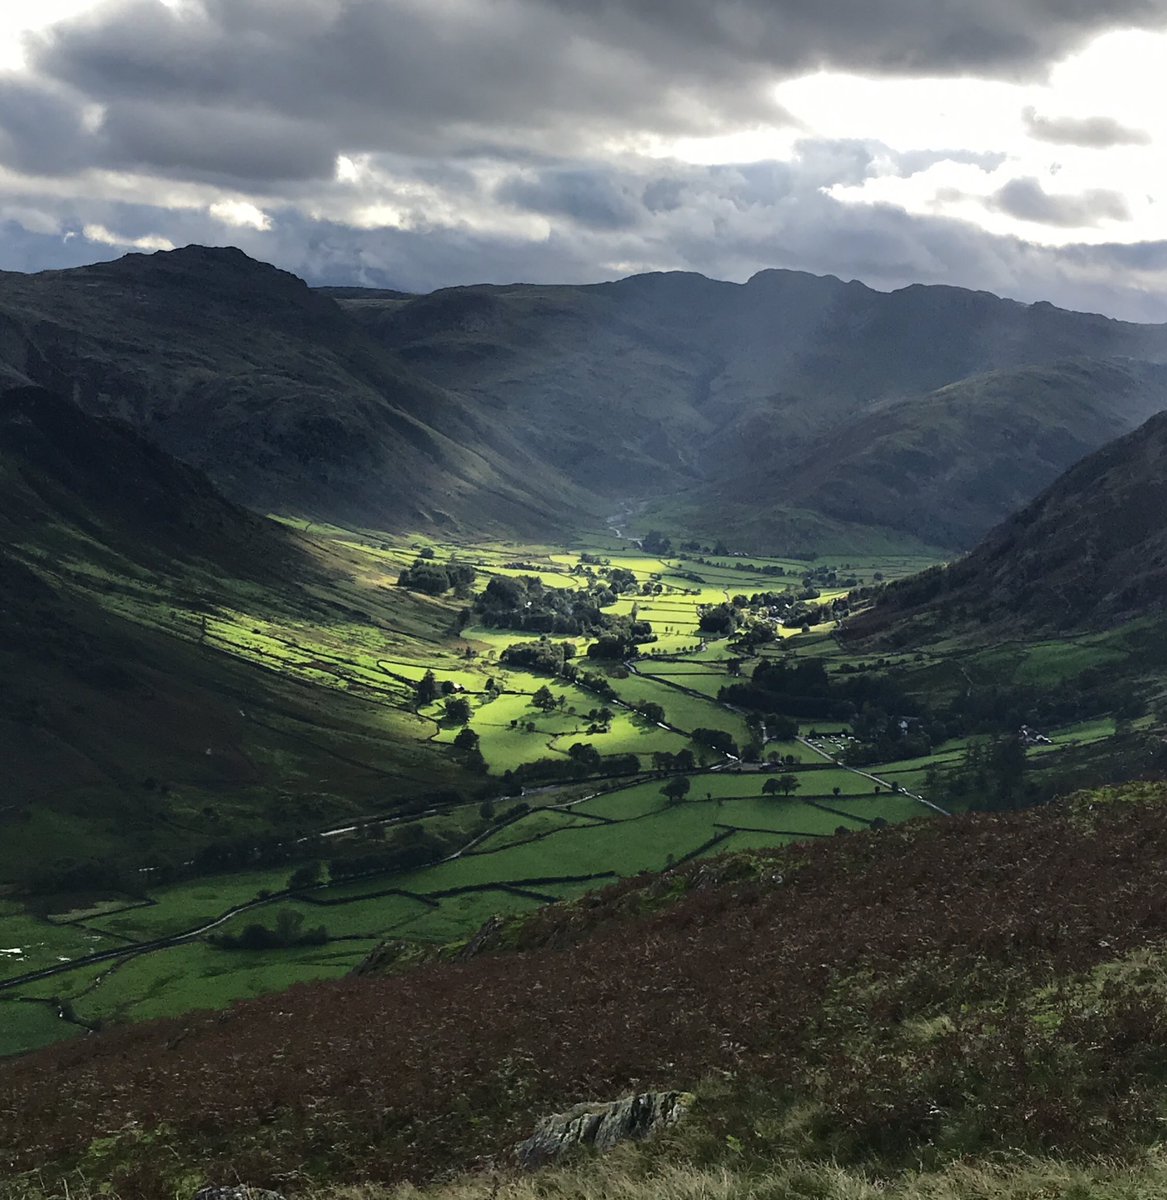 A view to stop us in our tracks! Looking down towards #greatlangdale yesterday on our approach to Silver How. #lovethelakes #LakeDistrict #getoutside #lightshow #iPhone7 #noedittingrequired